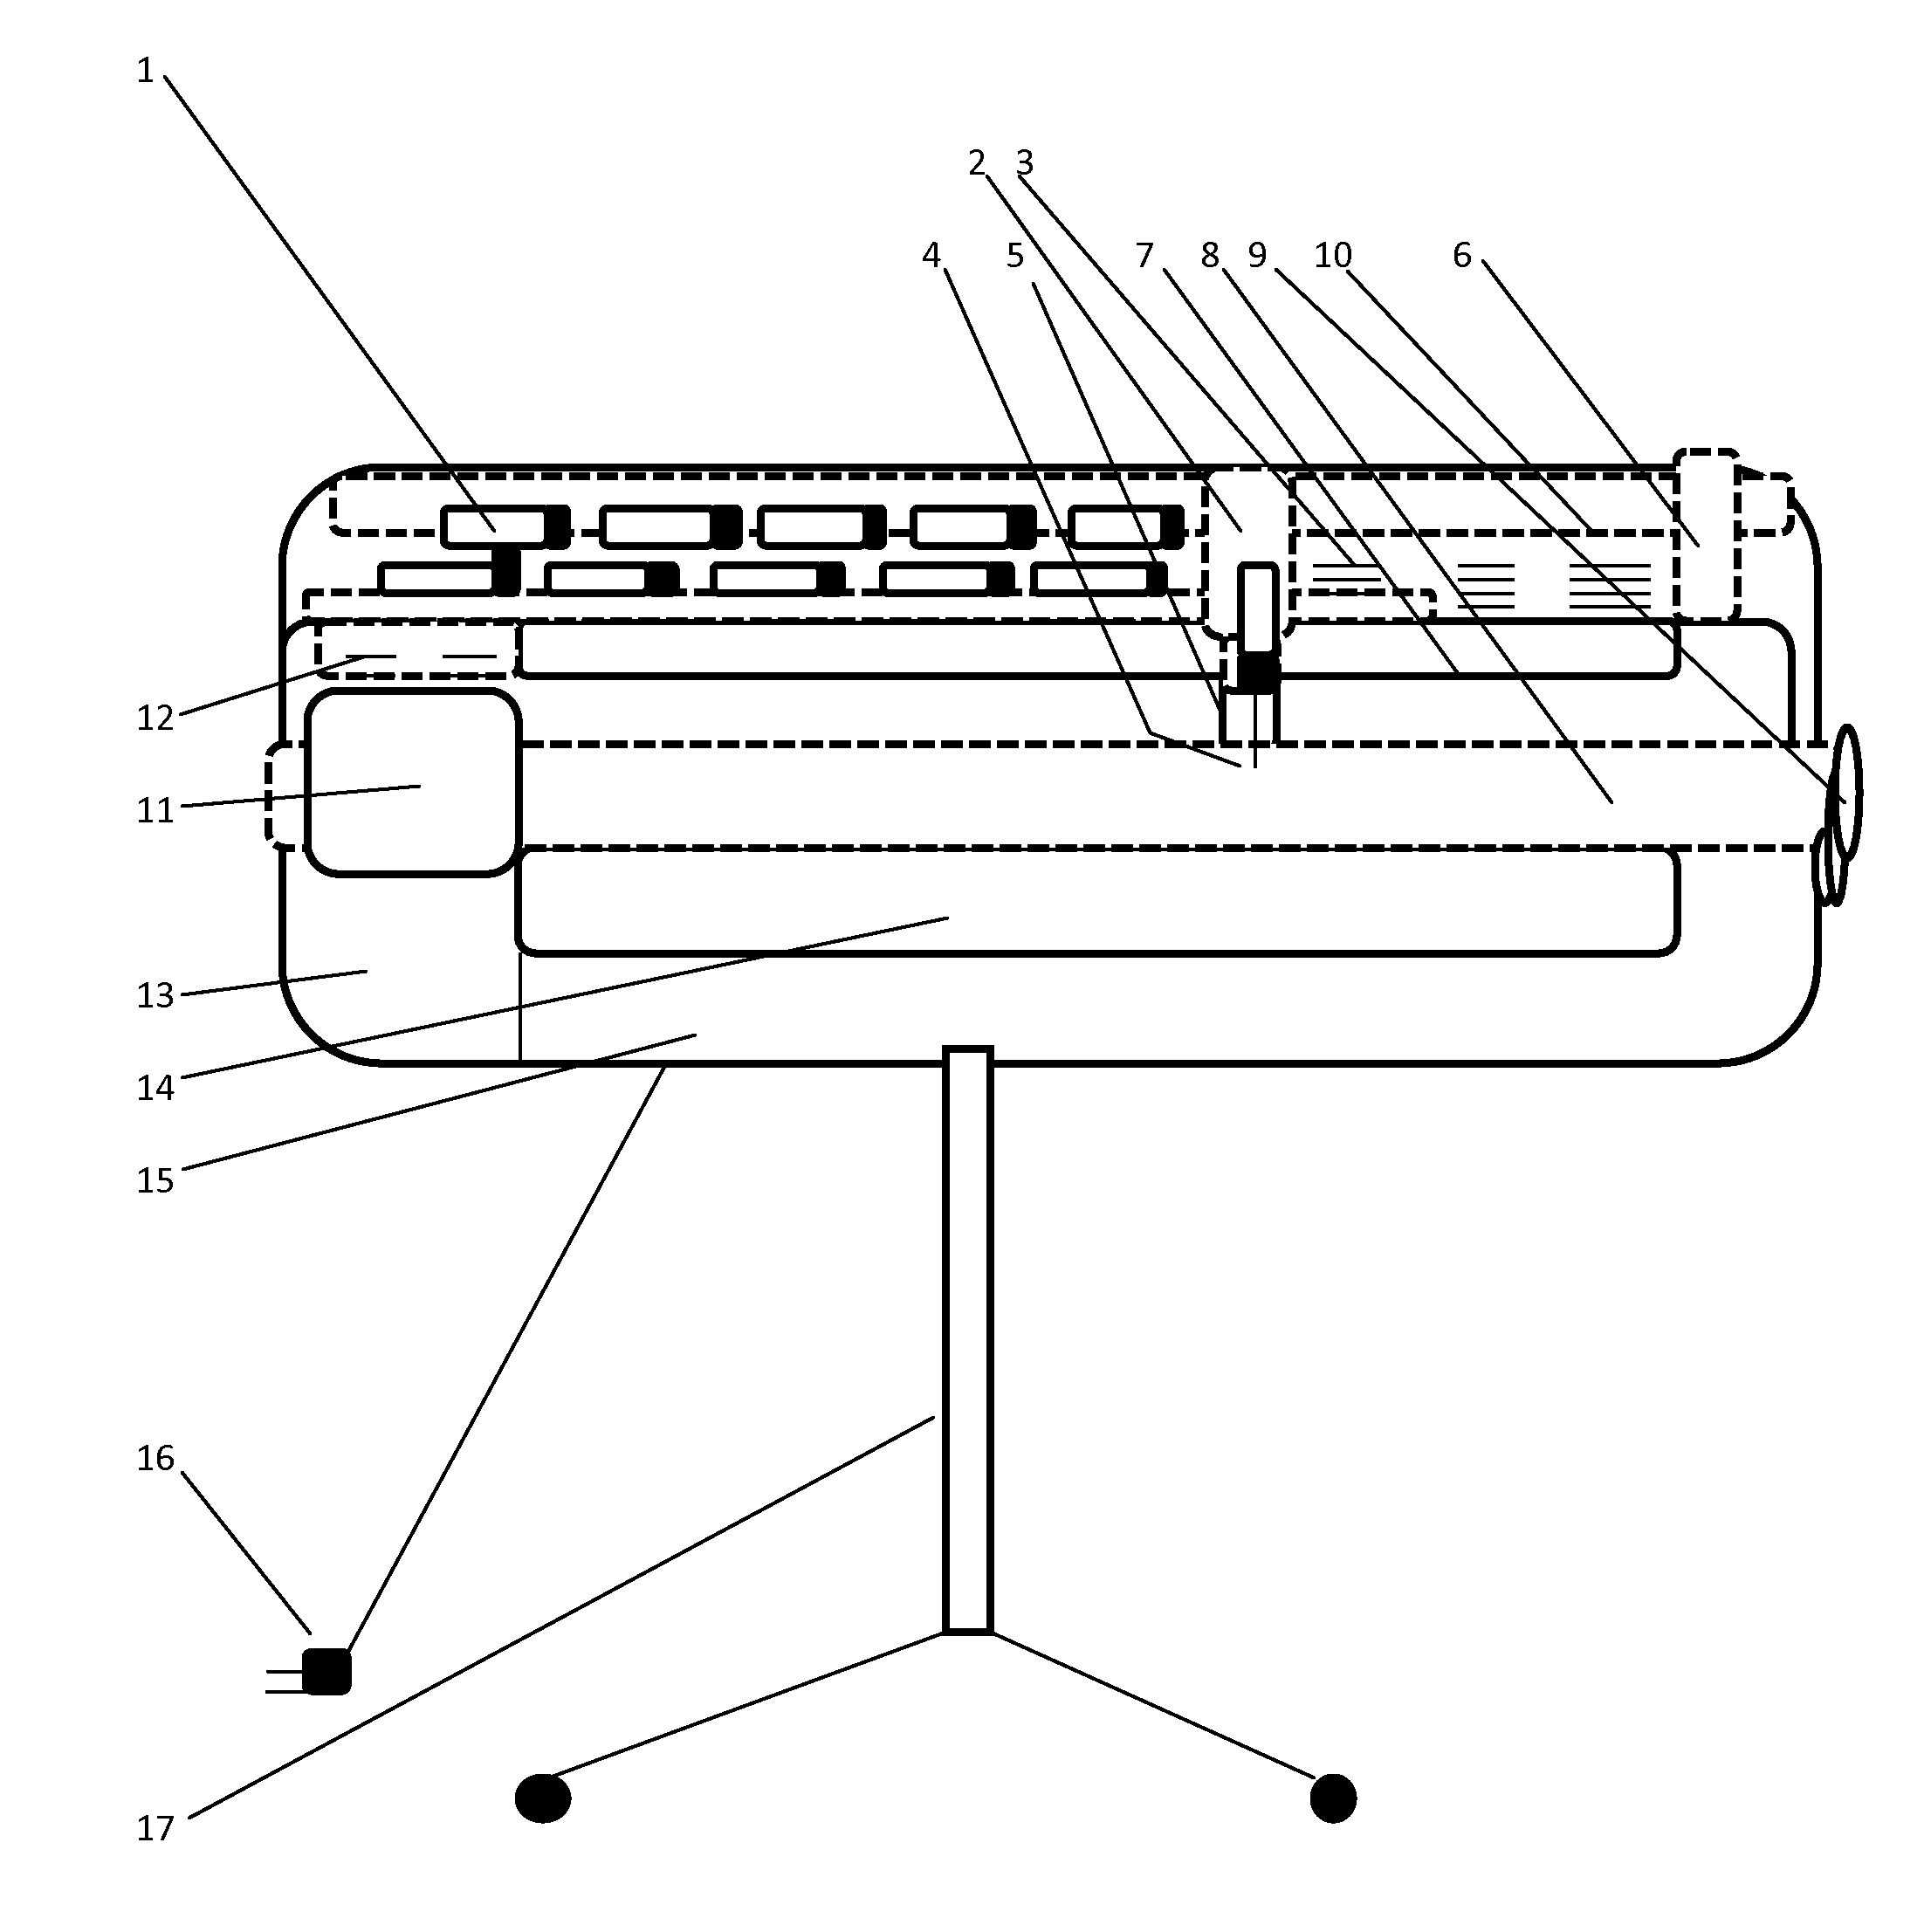 Automatic blood draw system and method